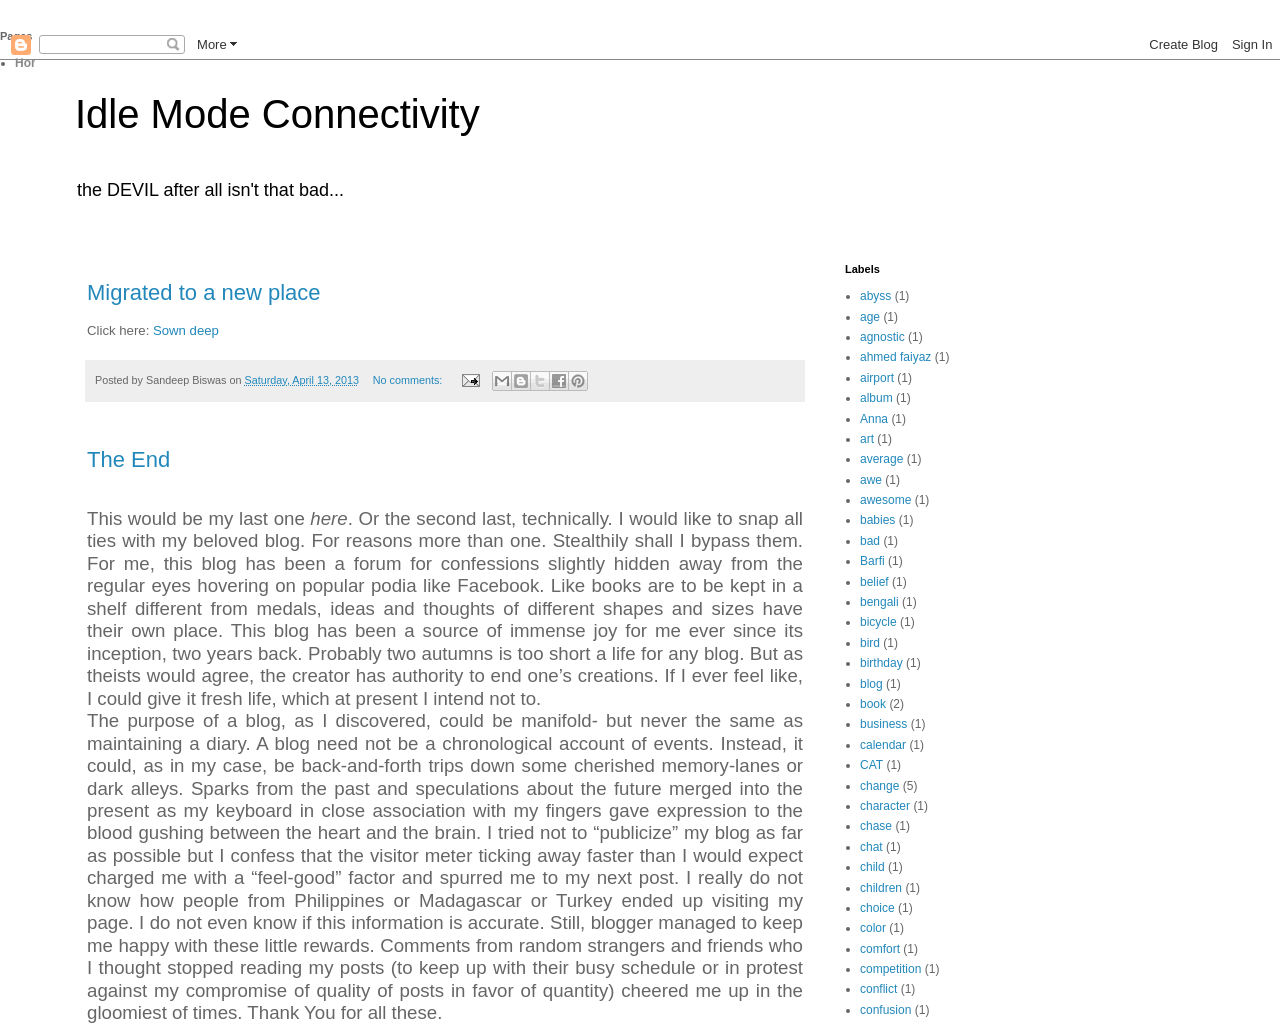 Idle Mode Connectivity